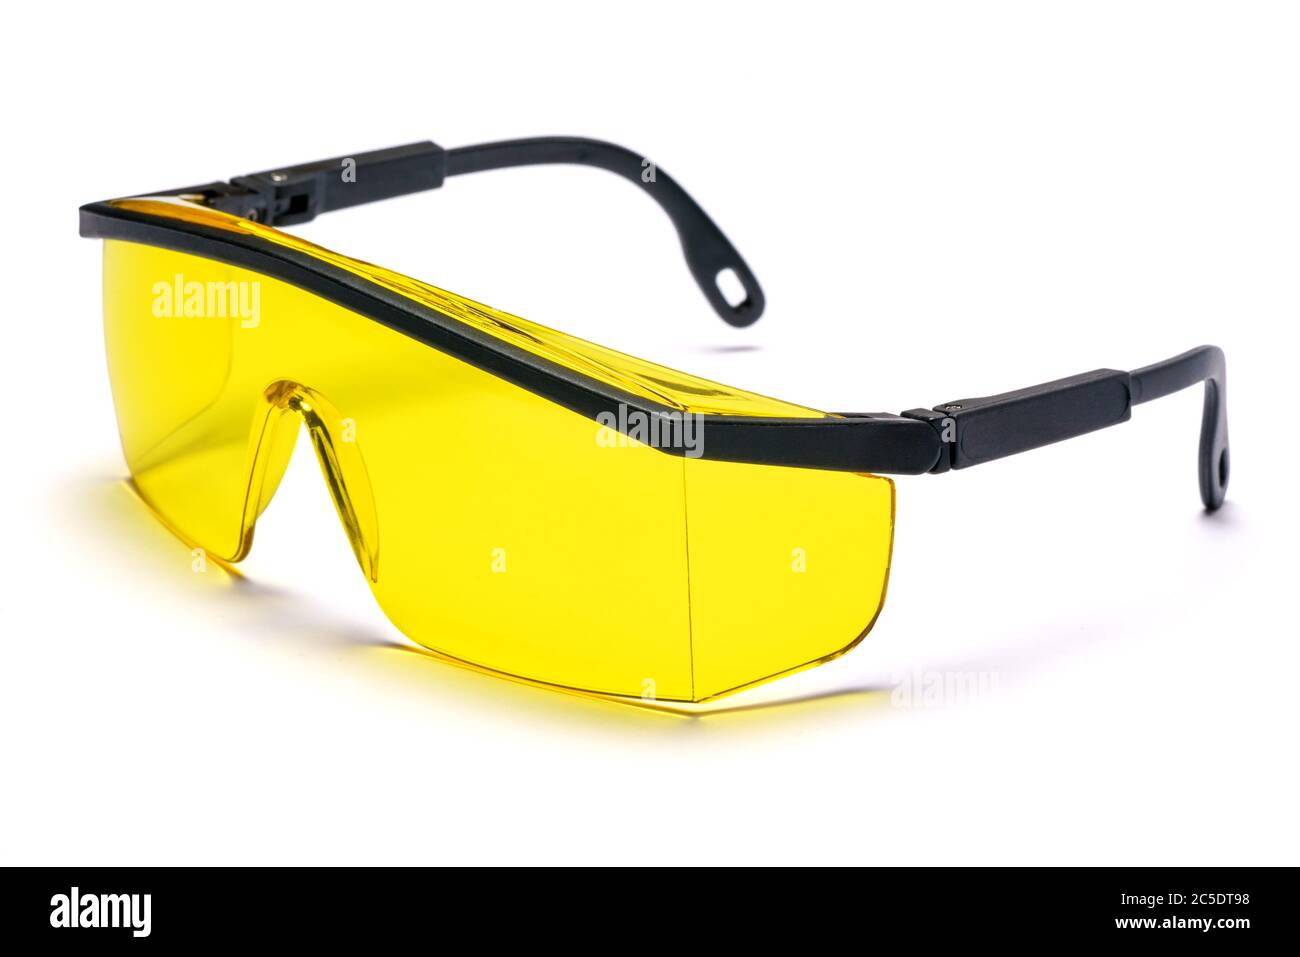 safety protective spectacles glasses isolated on white background with clipping path Stock Photo